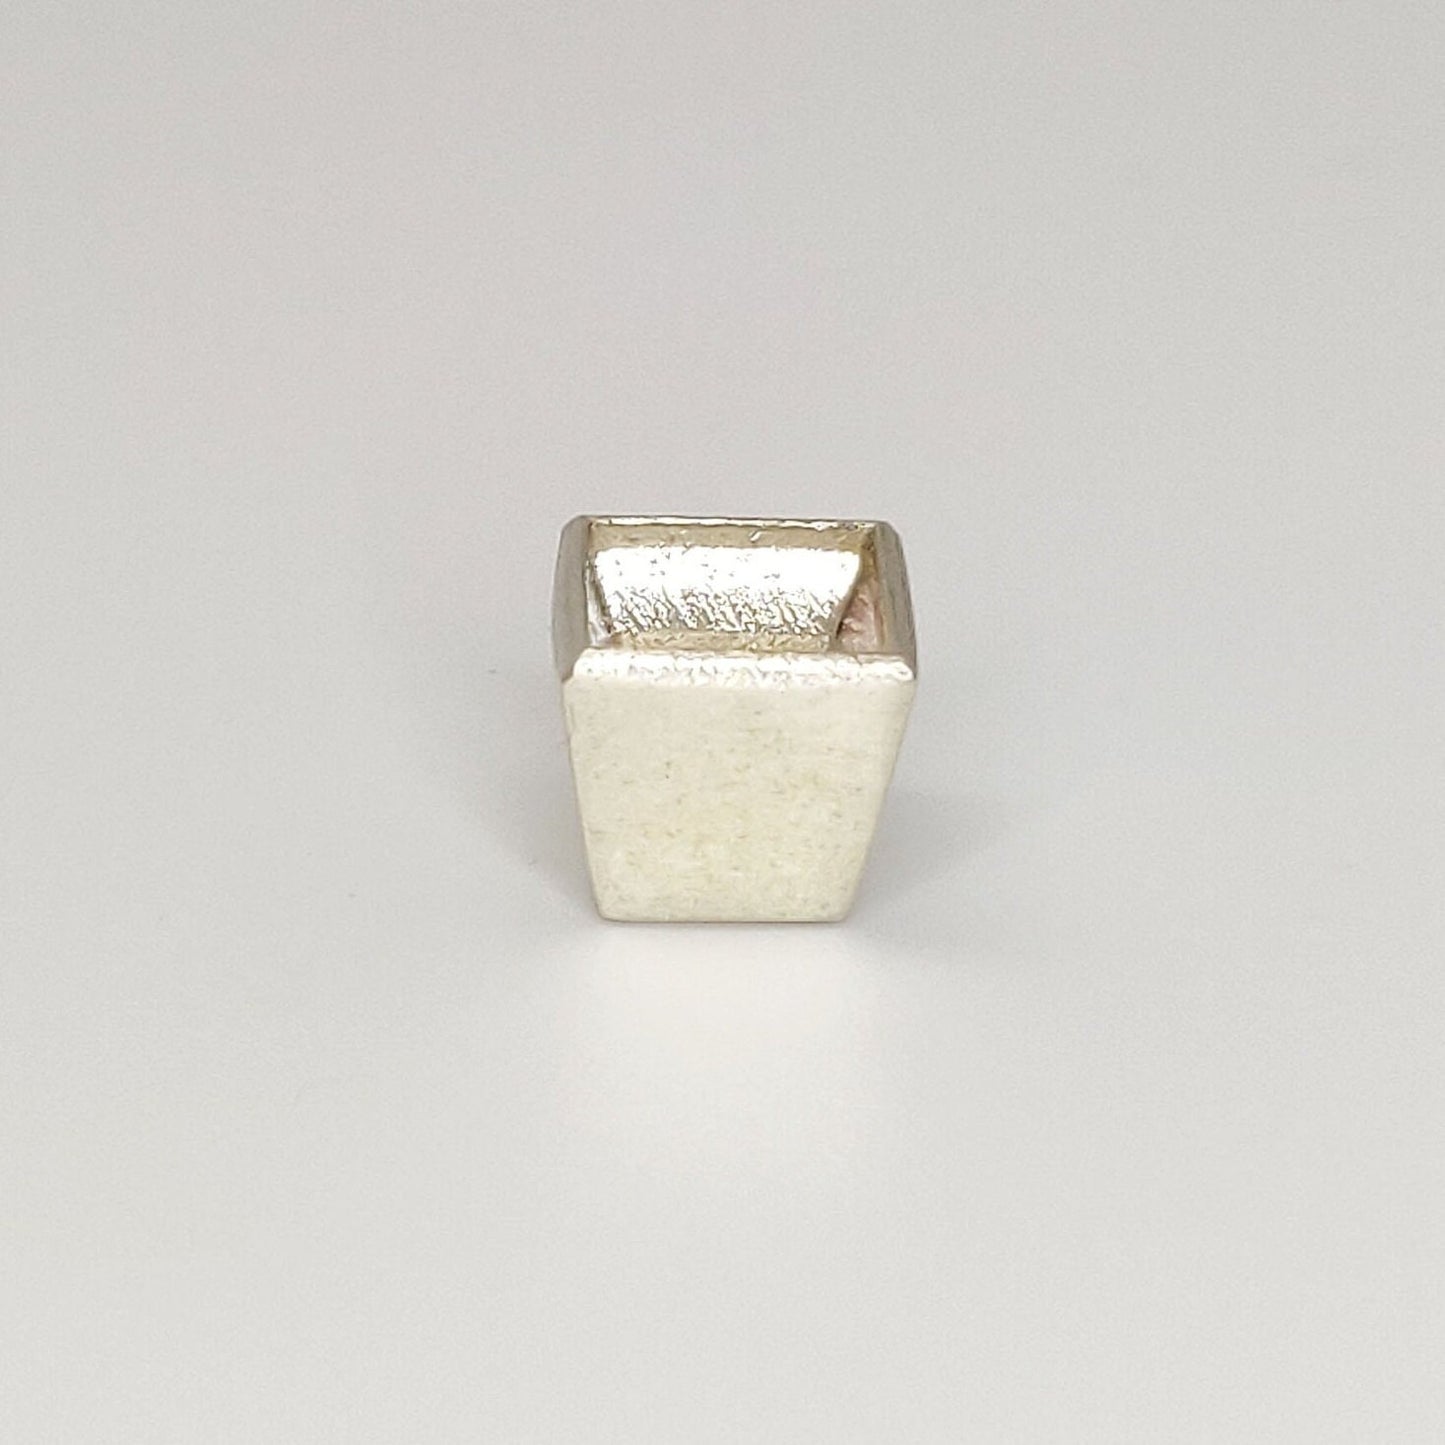 5mm Silver Princess Cut Gemstone Rubover Setting. Cast Recycled Silver Square Bezel. Jewelry Making Supplies. 9ct Yellow Gold Square Setting